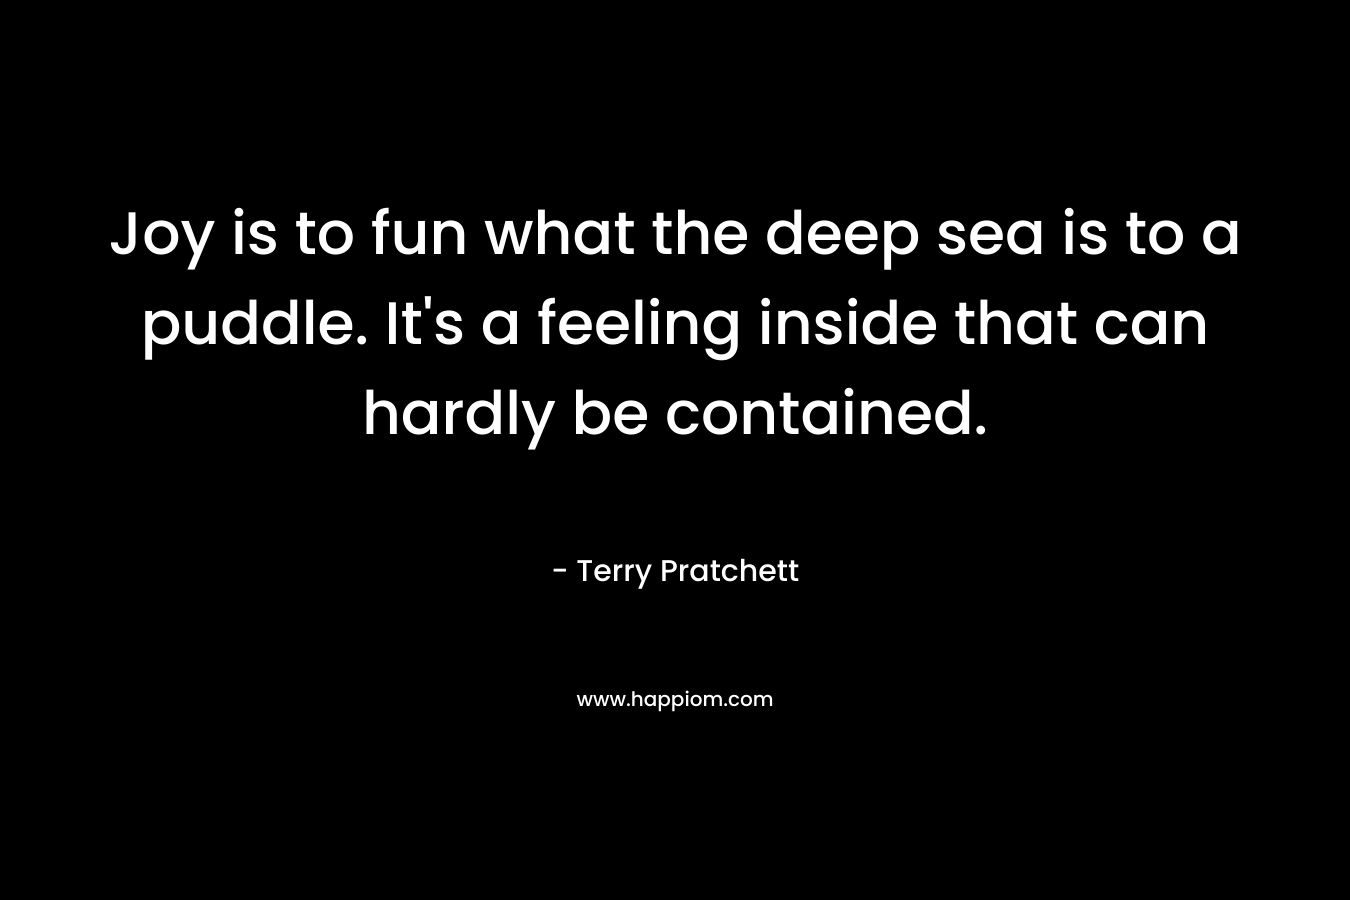 Joy is to fun what the deep sea is to a puddle. It’s a feeling inside that can hardly be contained. – Terry Pratchett